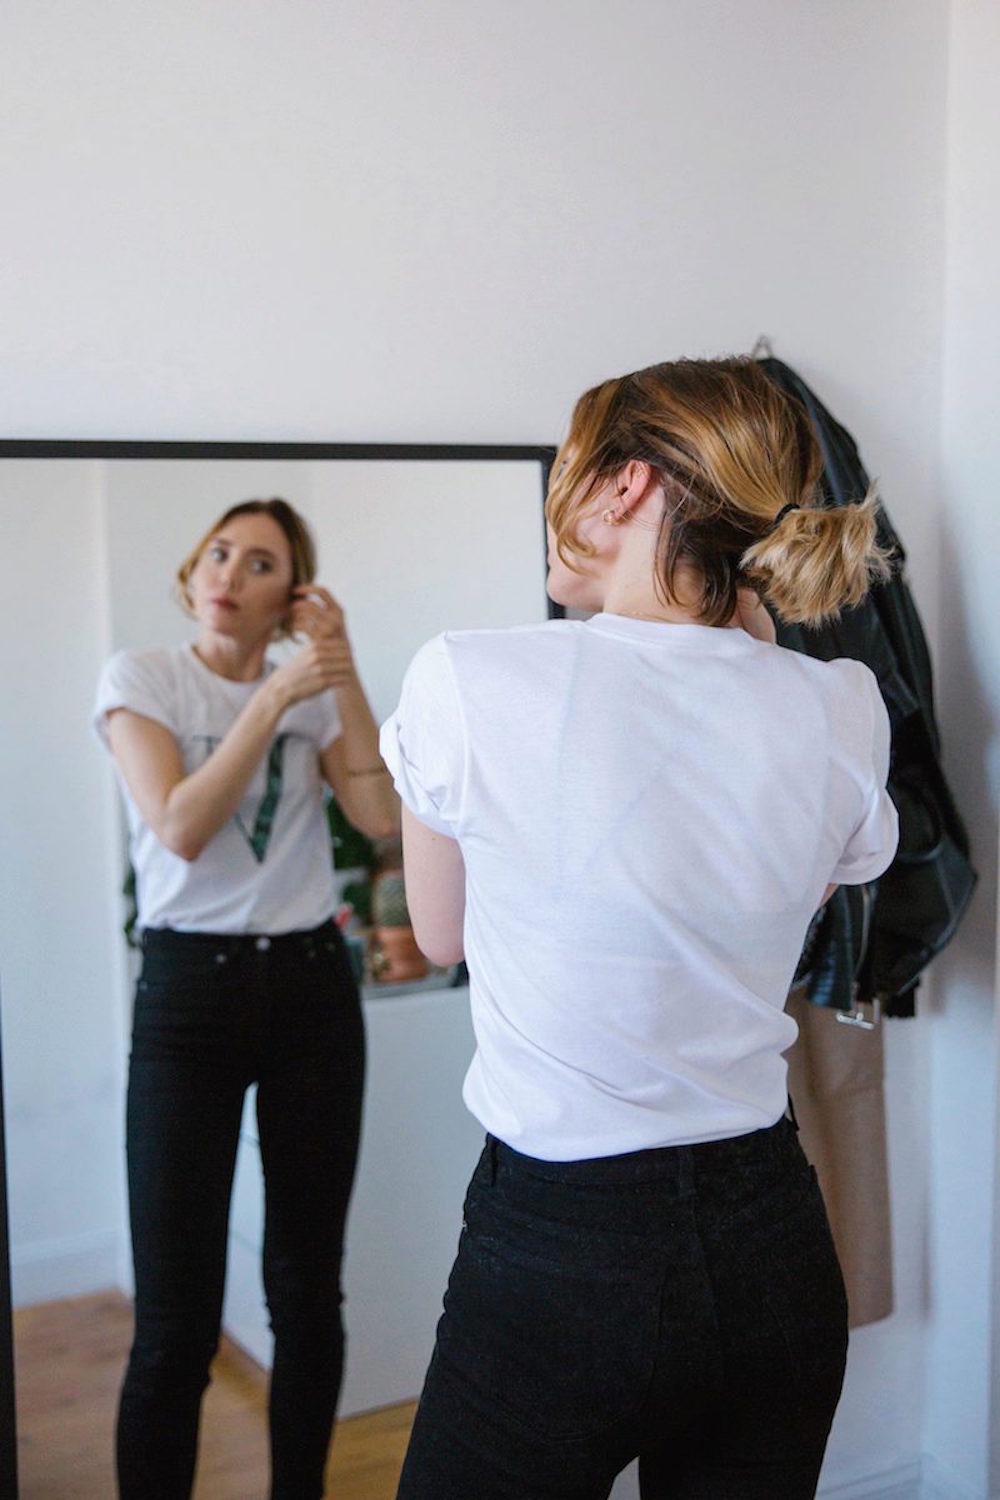 ways to let go of jealousy at work, black jeans, white tee, mirror, work chic outfit